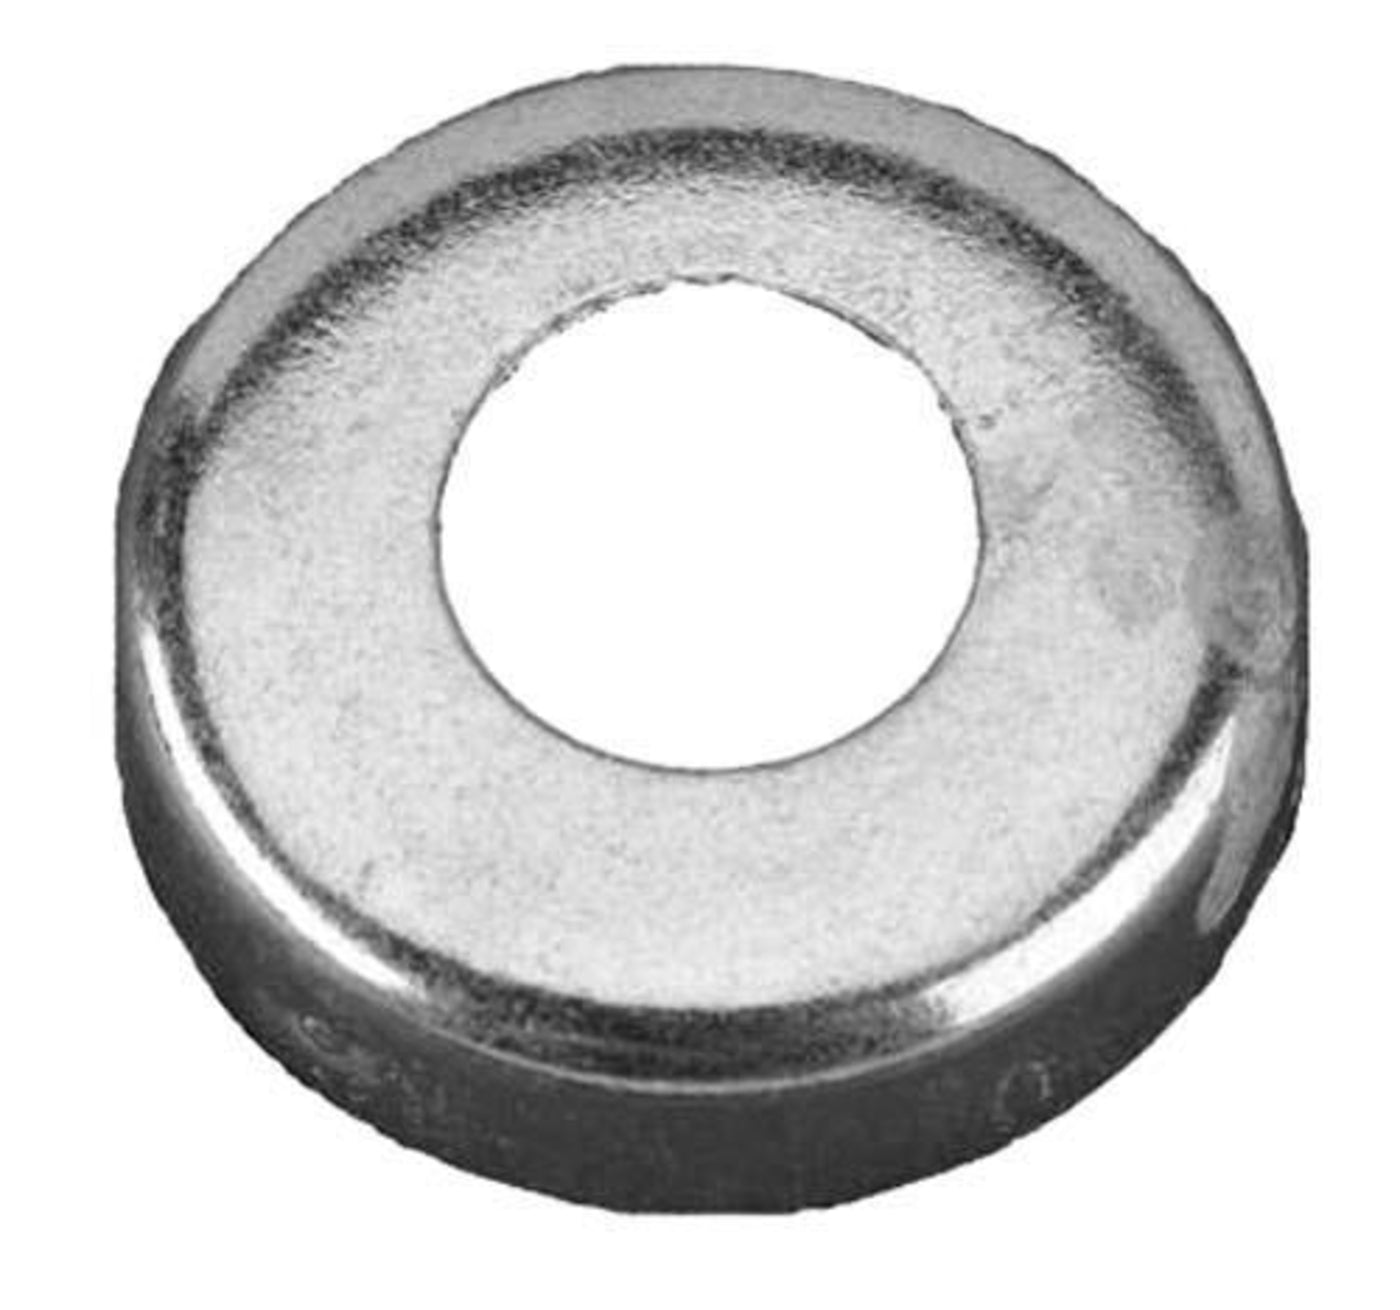 E-Z-GO 3/8" Accelerator Spring Retainer (Years 1994-Up)